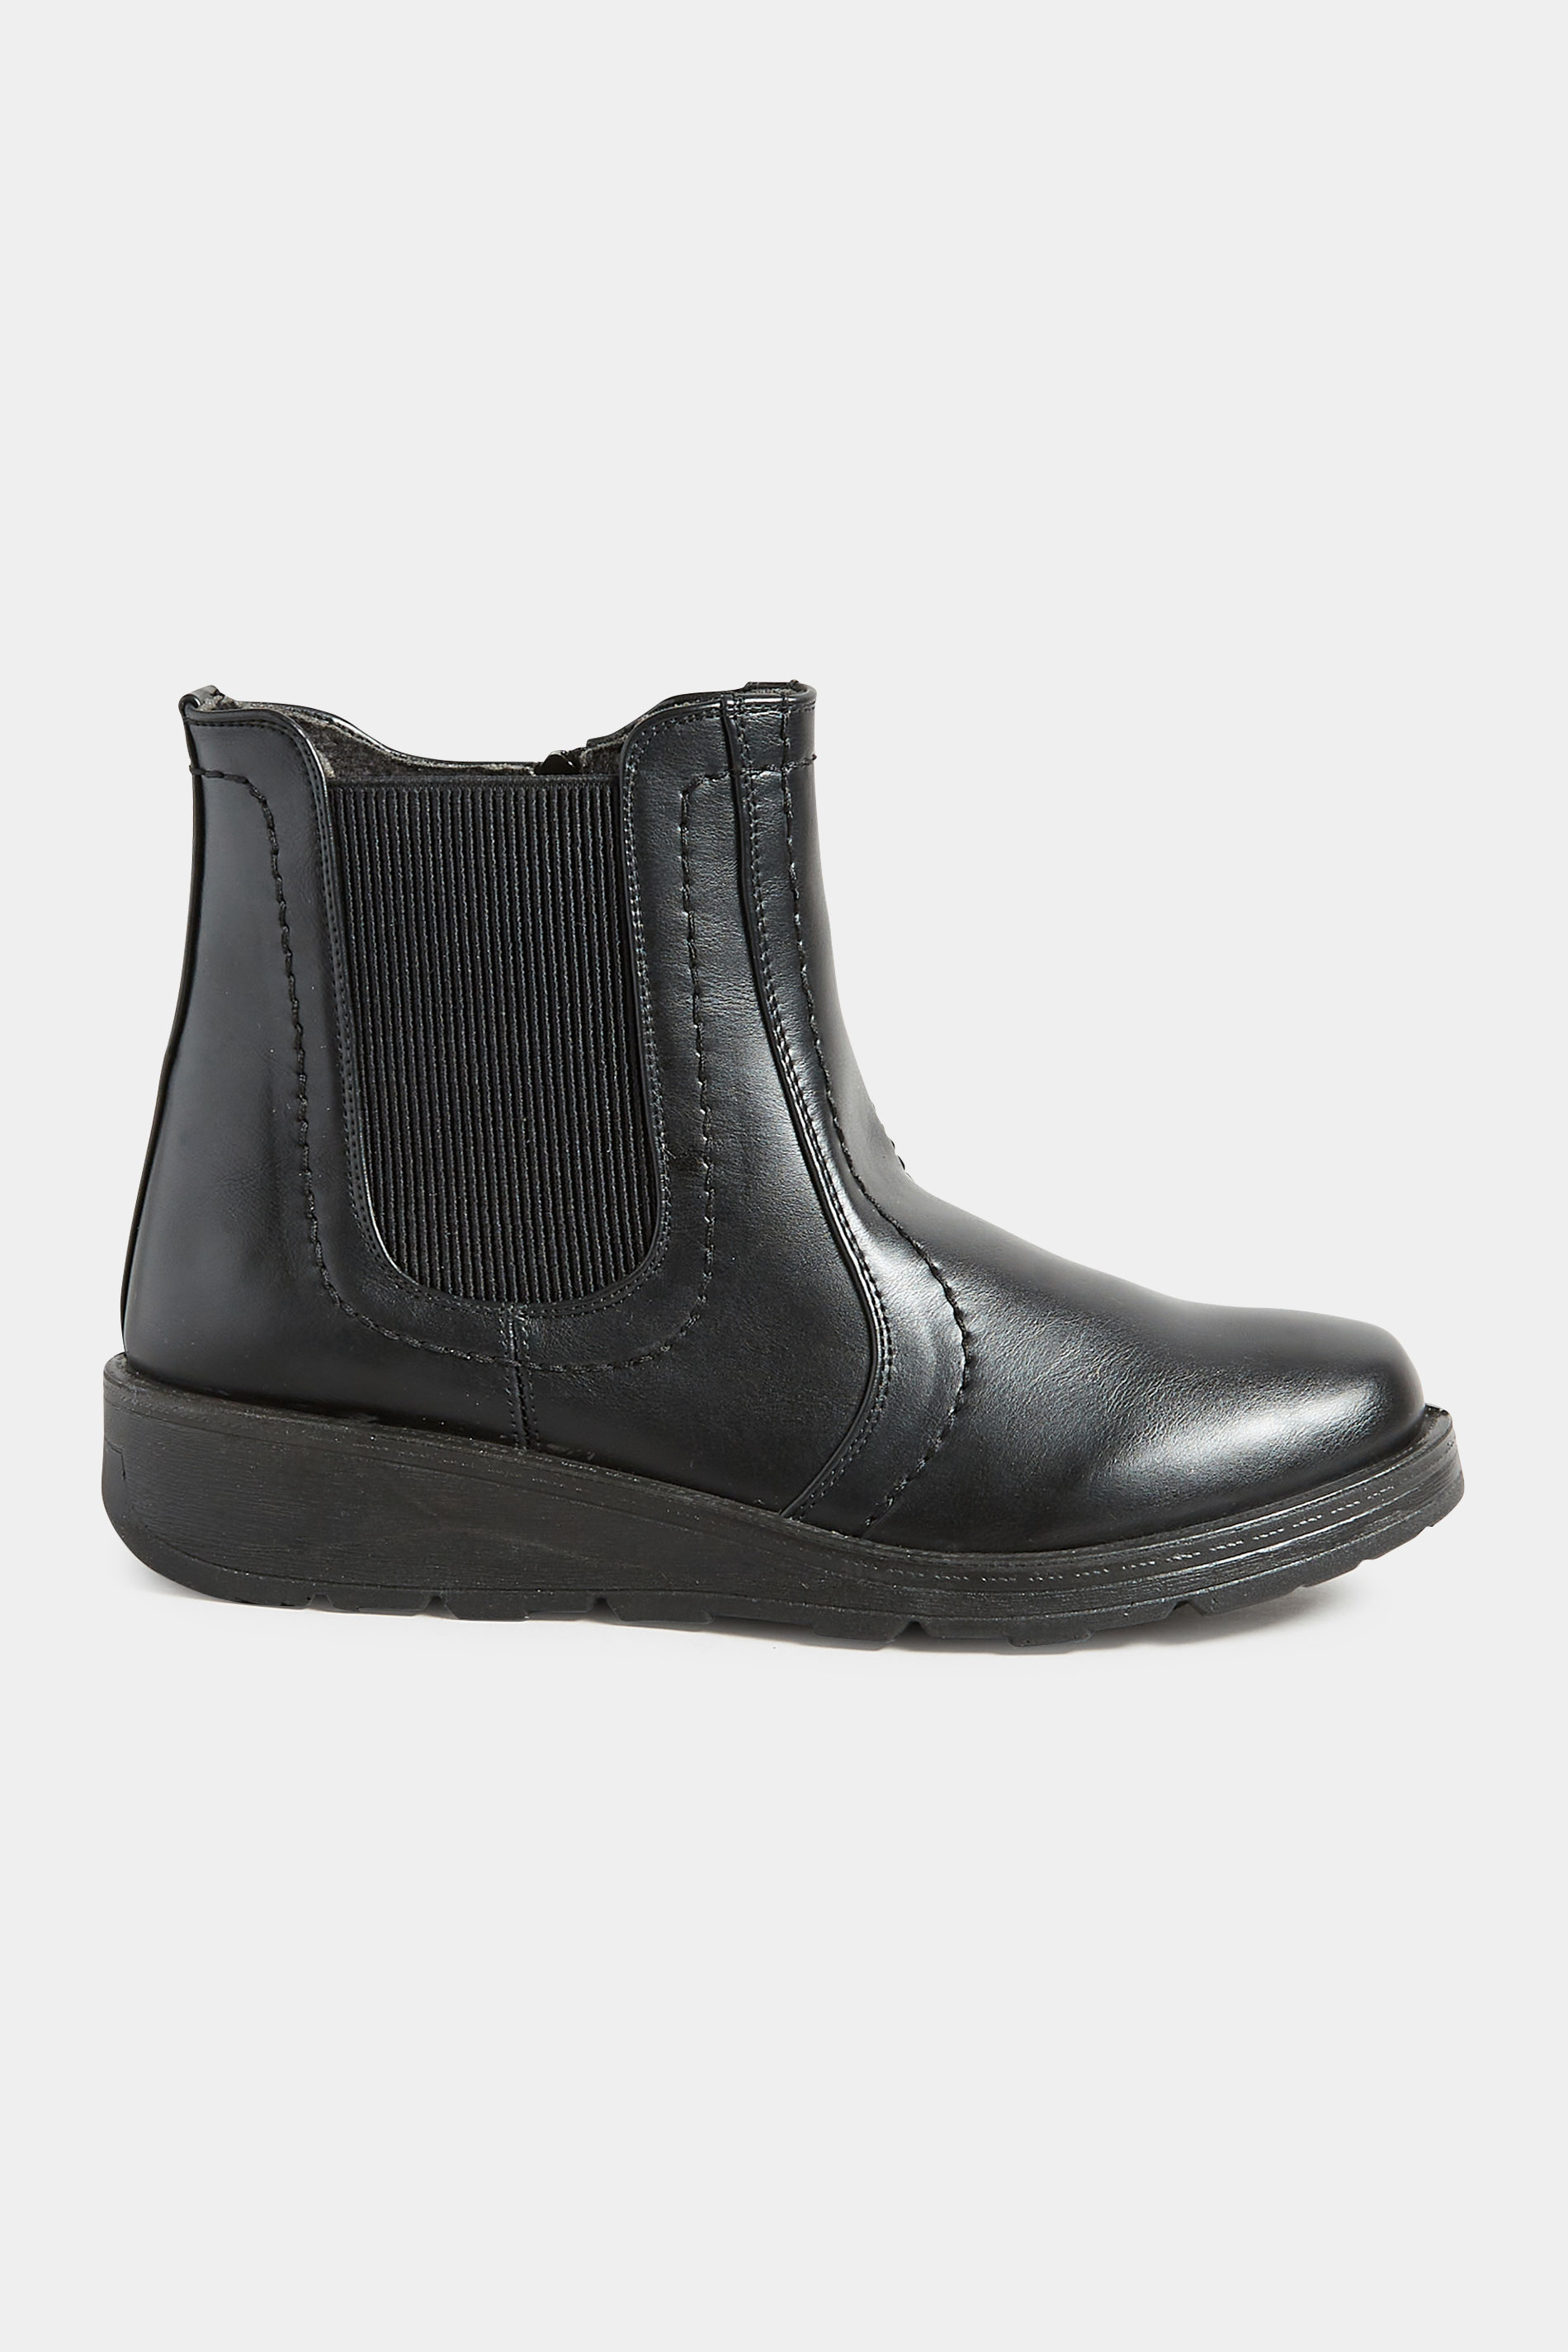 Black Wedge Chelsea Boots In Wide E Fit & Extra Wide EEE Fit | Yours Clothing 3